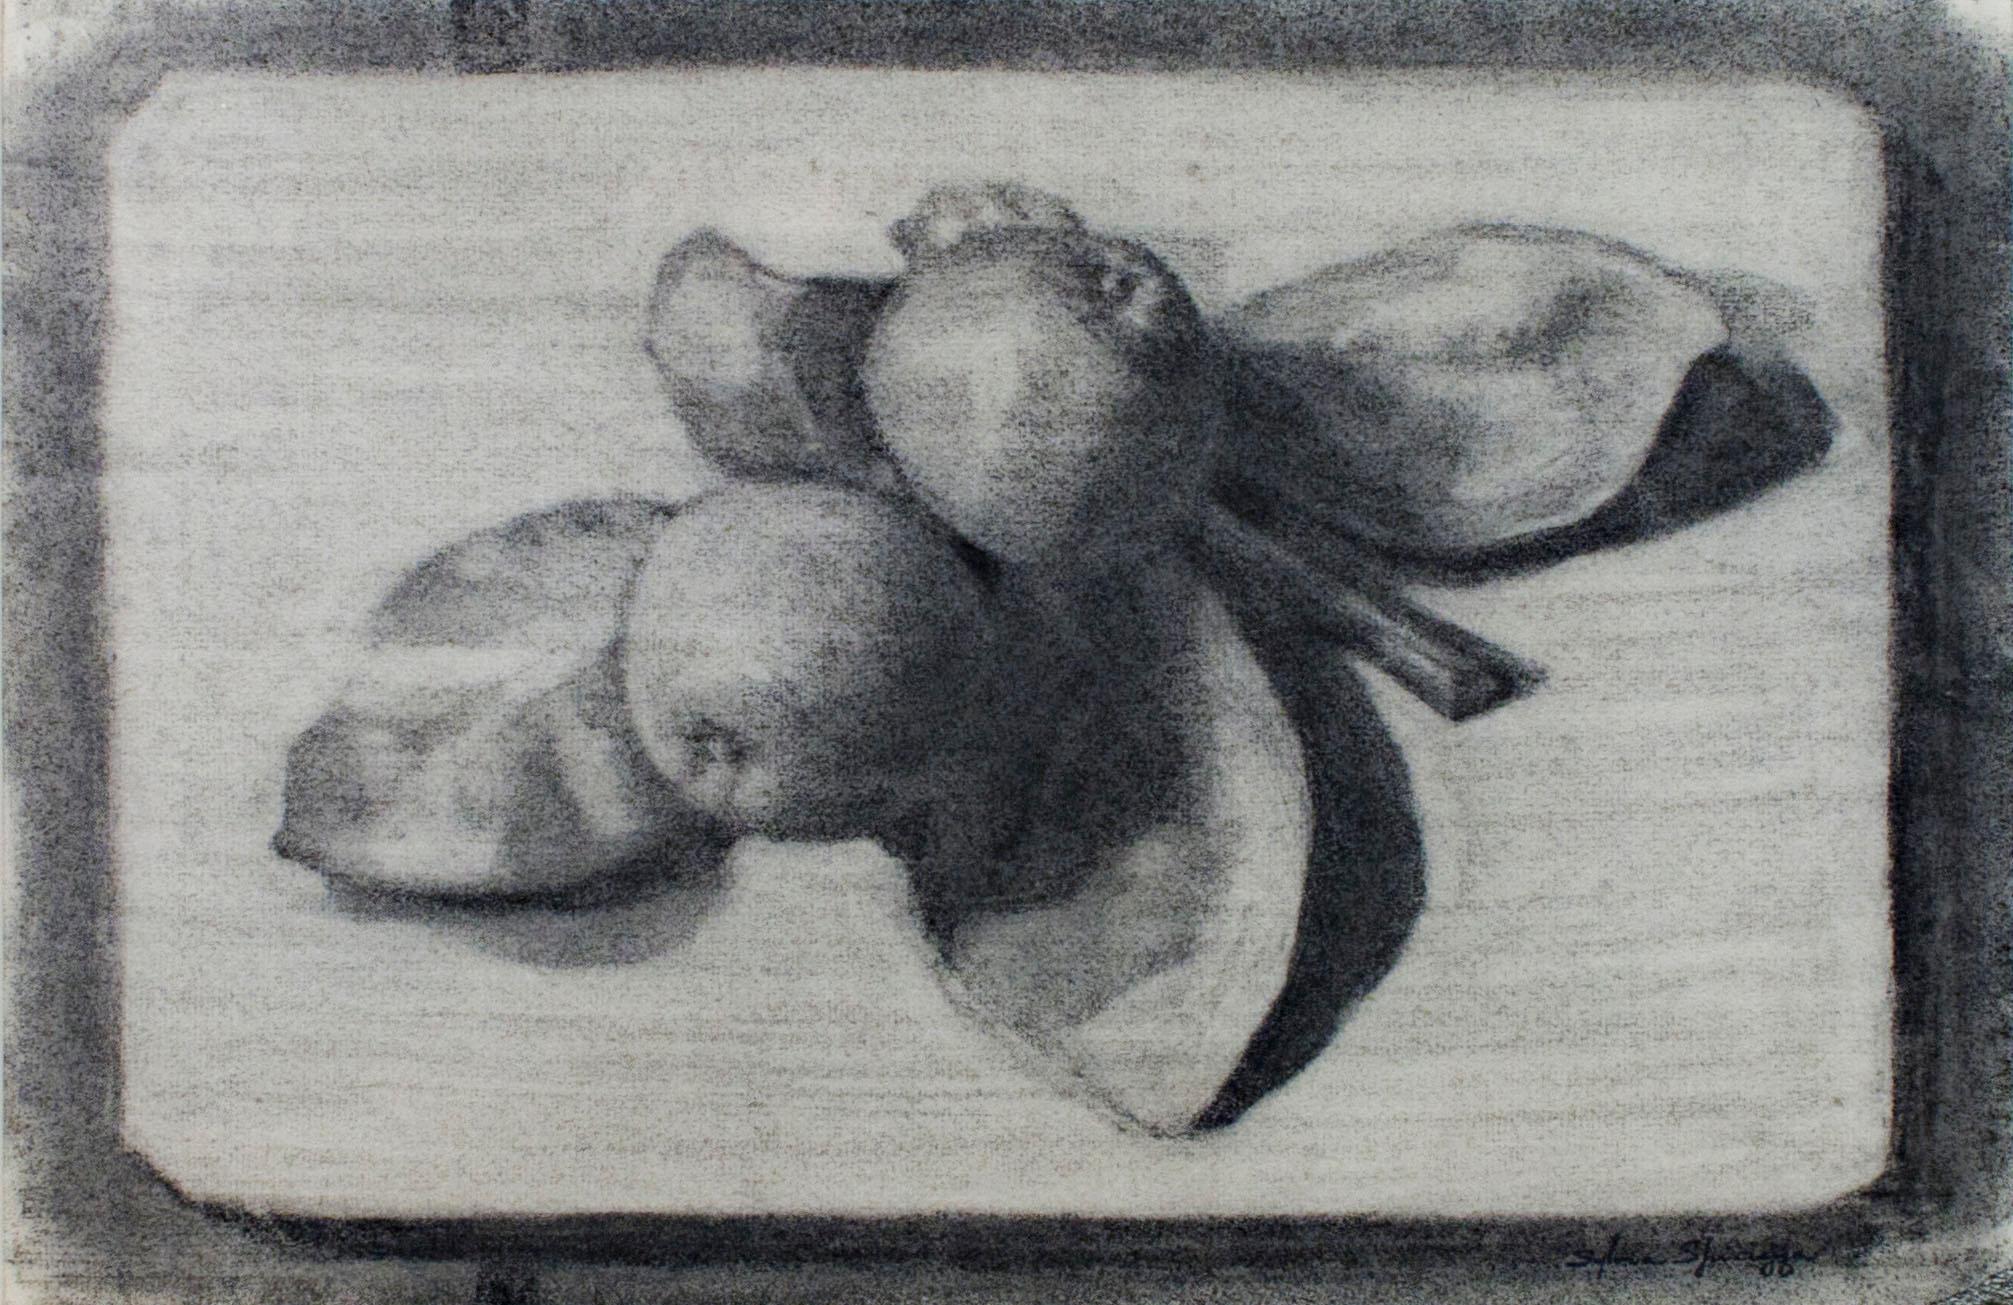 "Still Life with Fruit" original charcoal drawing by Sylvia Spicuzza